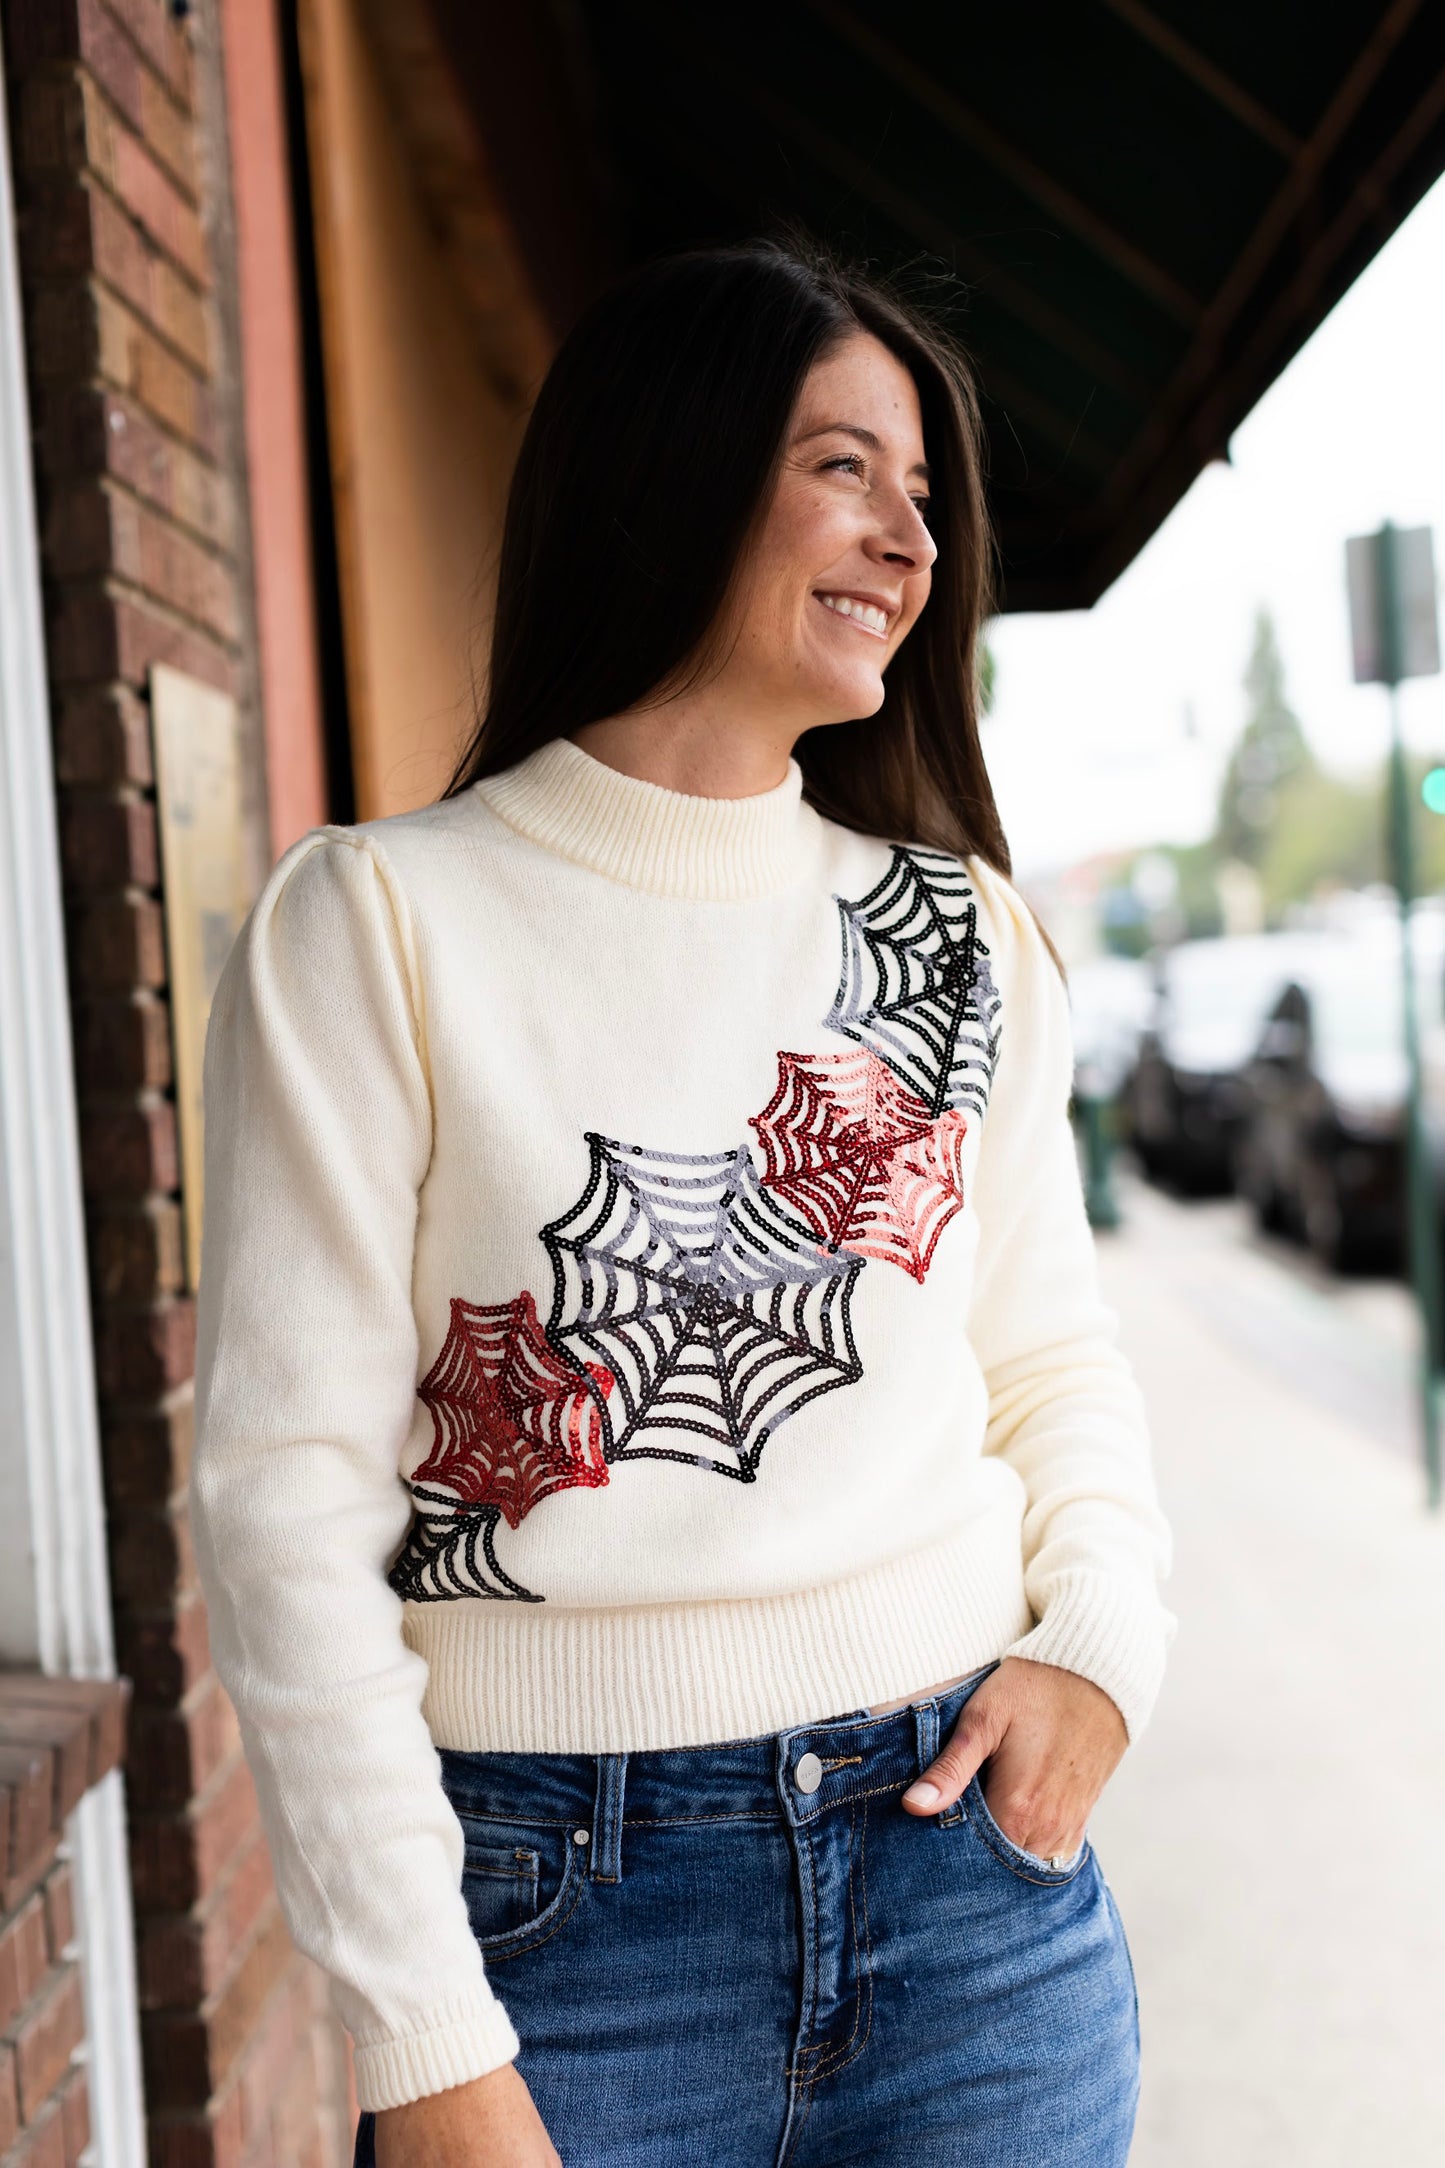 Load image into Gallery viewer, Elevated Halloween Sparkly Spider Web Sweater | Friendly Halloween Top
